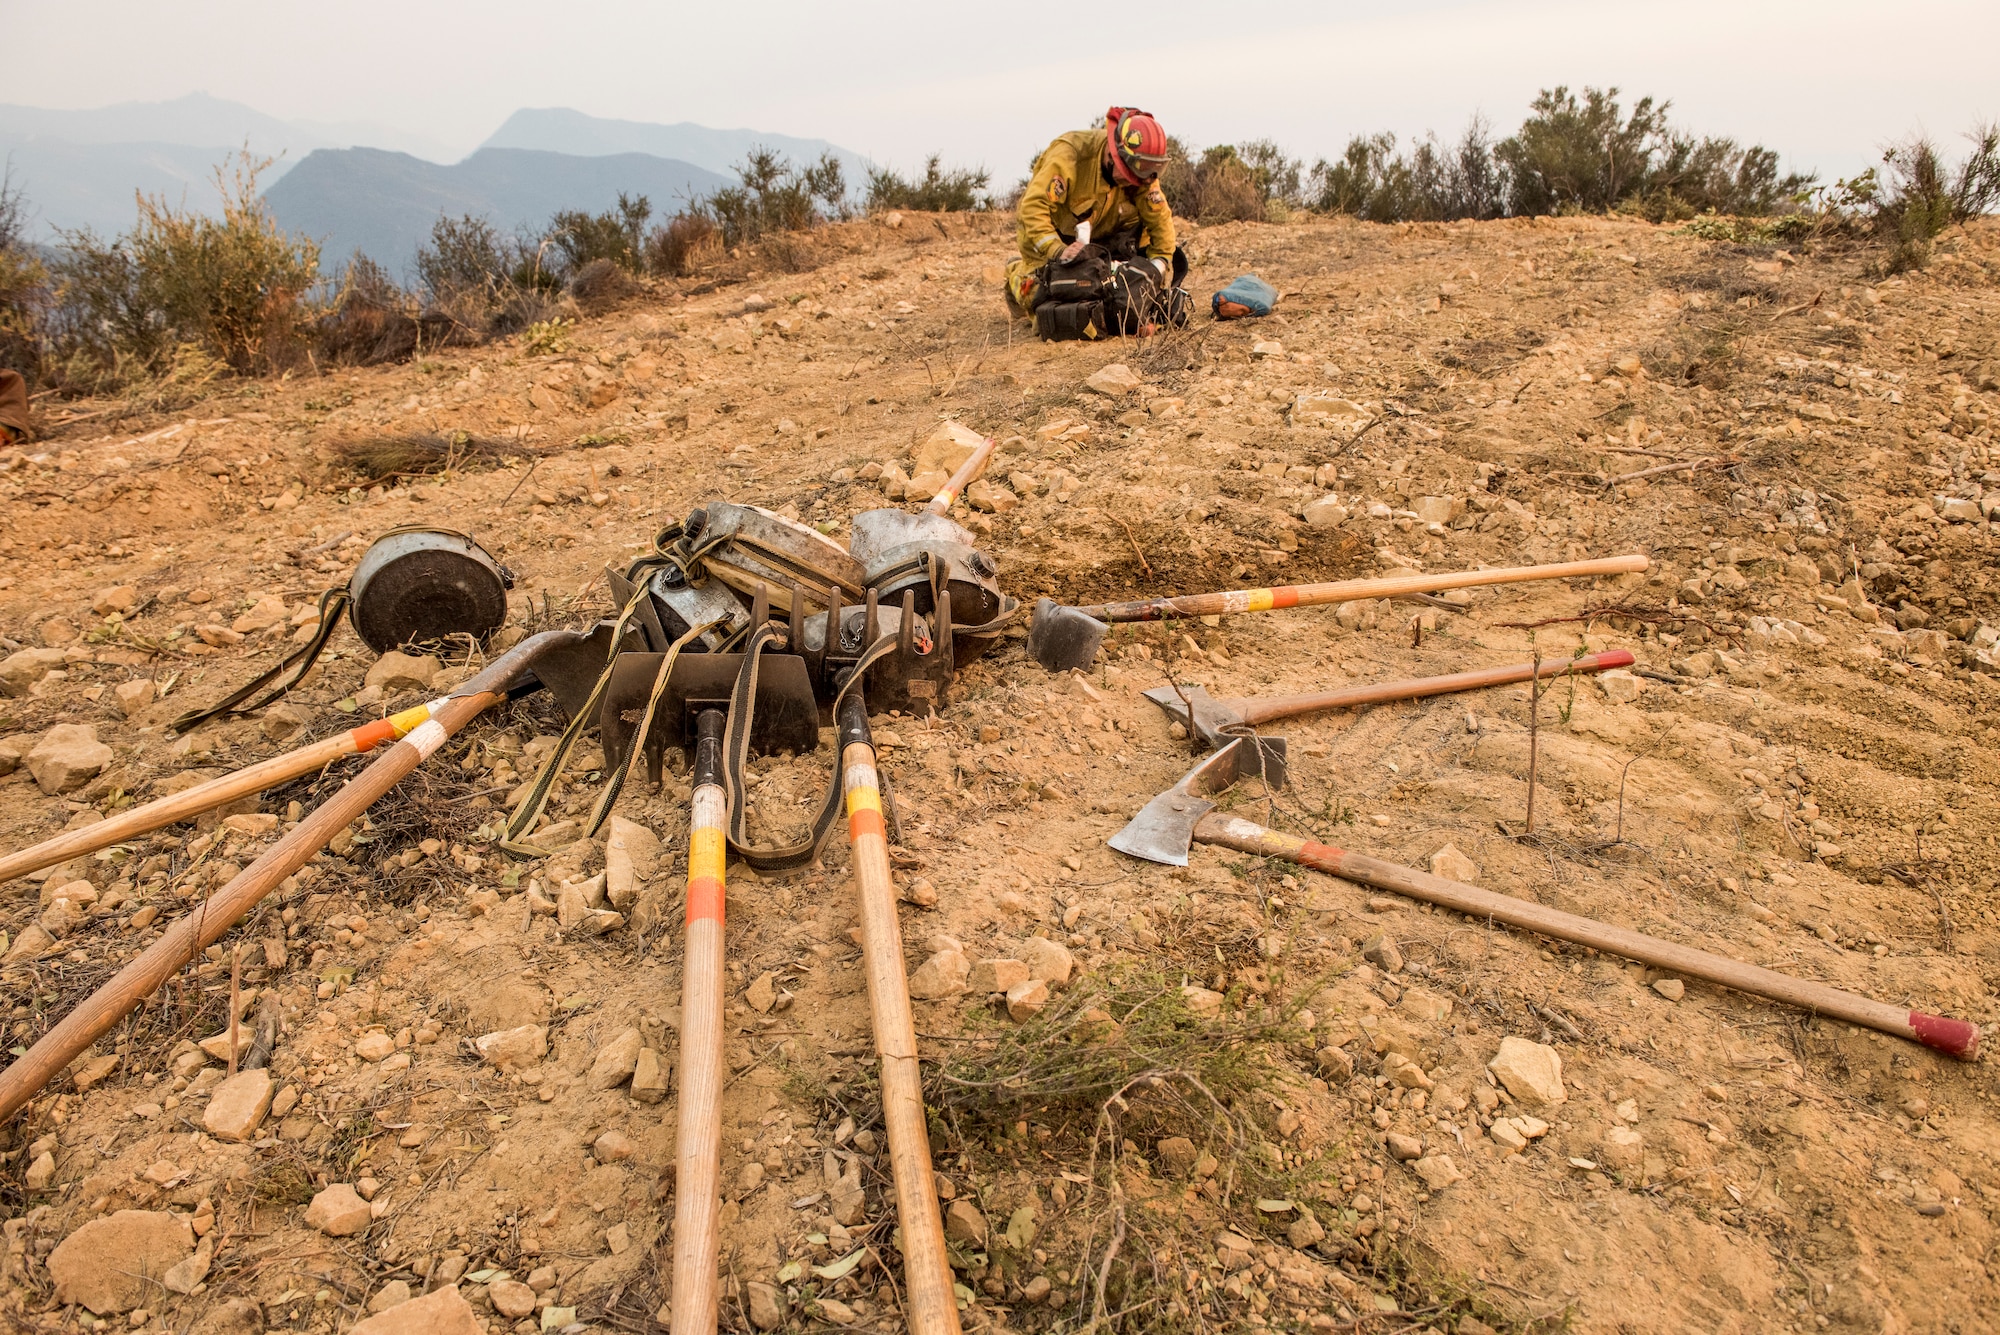 California Department of Corrections inmate fire fighter tools sit in a fire line near Santa Barbara, California, Dec 11, 2017.  The inmates were brought in to help fight the Thomas Fire. The fire started on Dec. 4, 2017 in Santa Paula, near Thomas Aquinas College. Driven by Santa Ana winds gusting up to 70 mph, the flames screamed across the hillsides toward Ojai, Ventura and Santa Barbara. (U.S. Air Force photo/Master Sgt. Brian Ferguson)